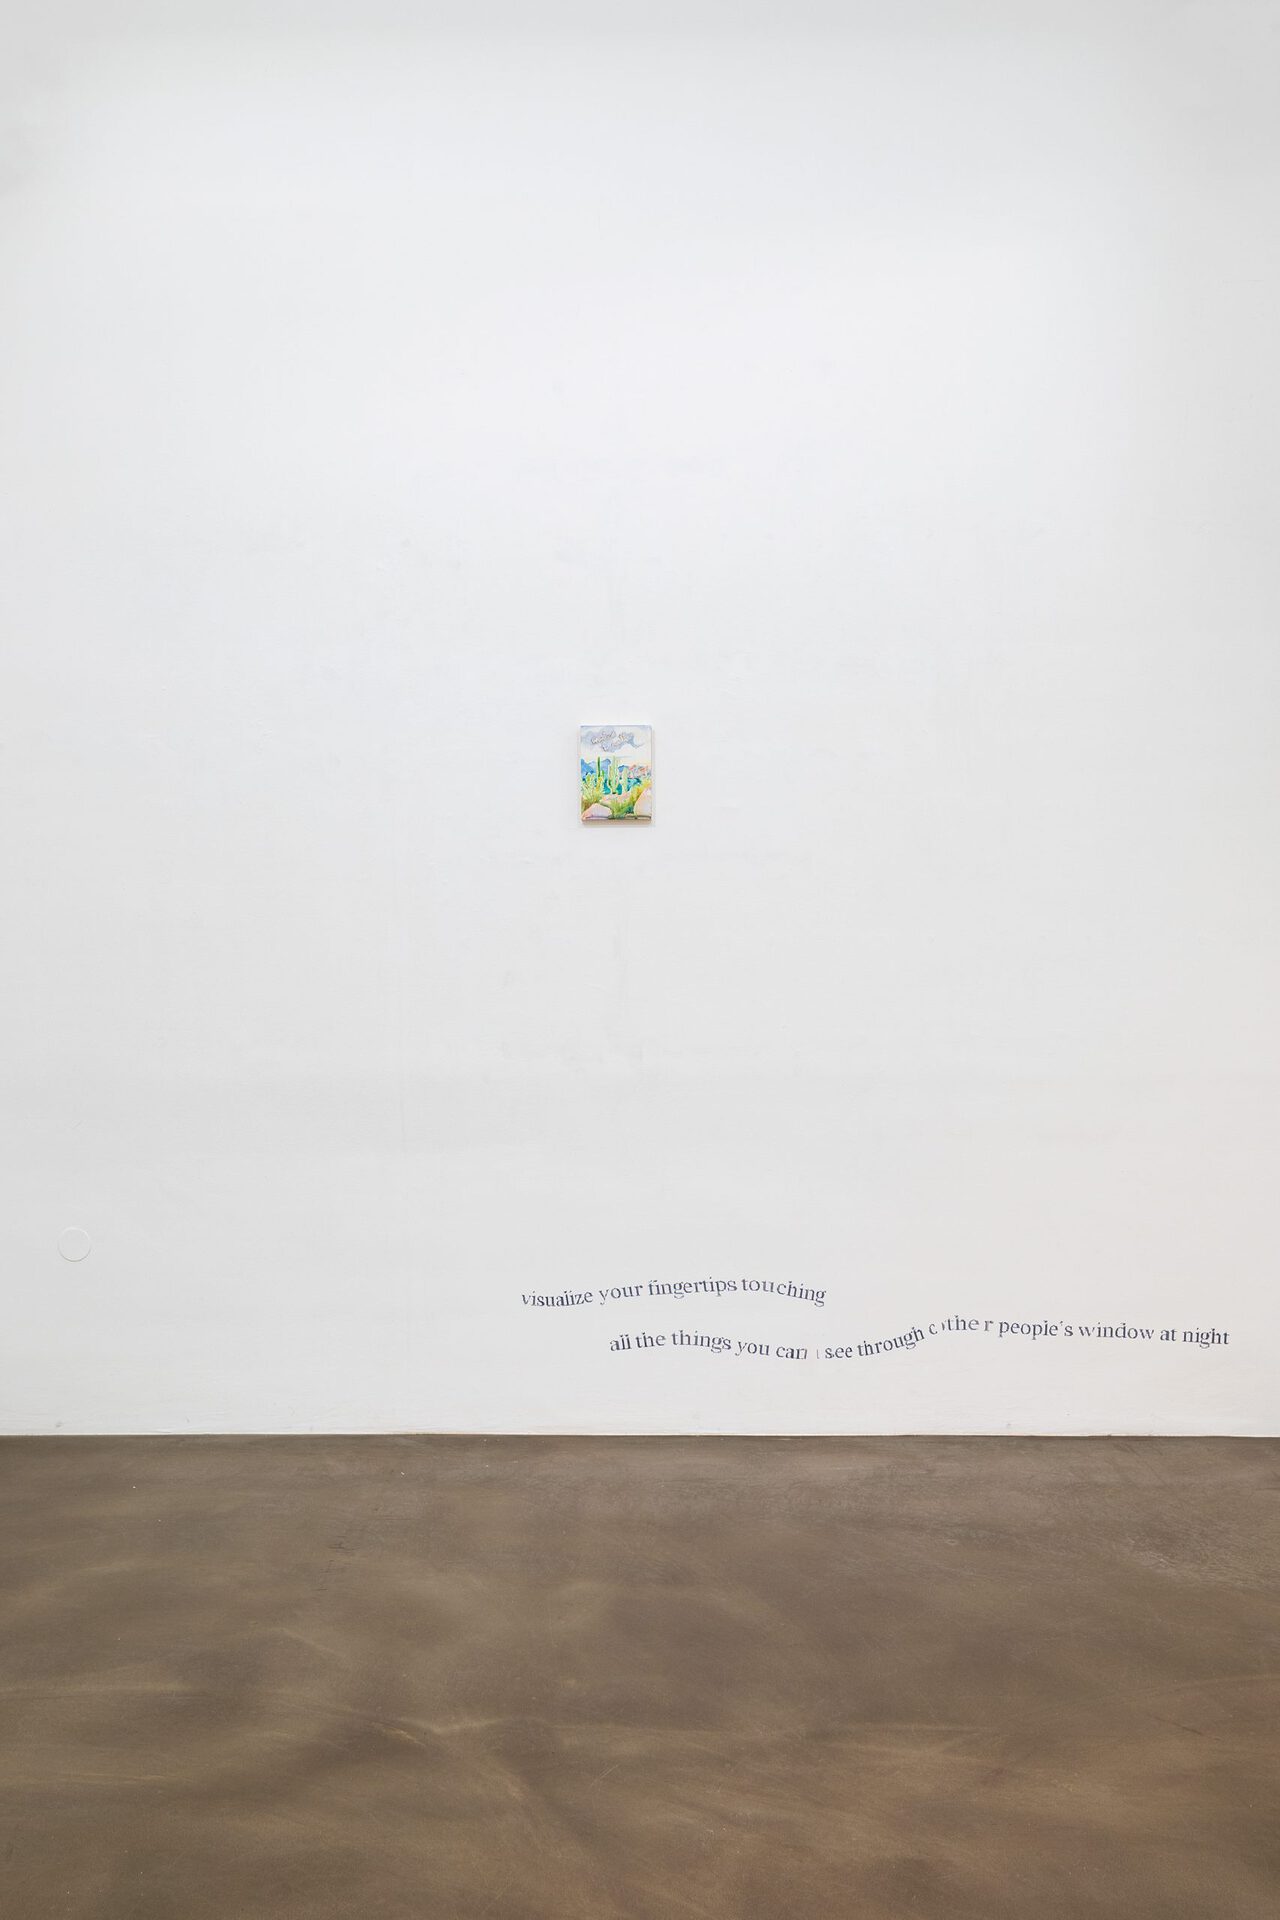 Titania Seidl, songs of the early 20s, 2020, watercolor on wood, installation view